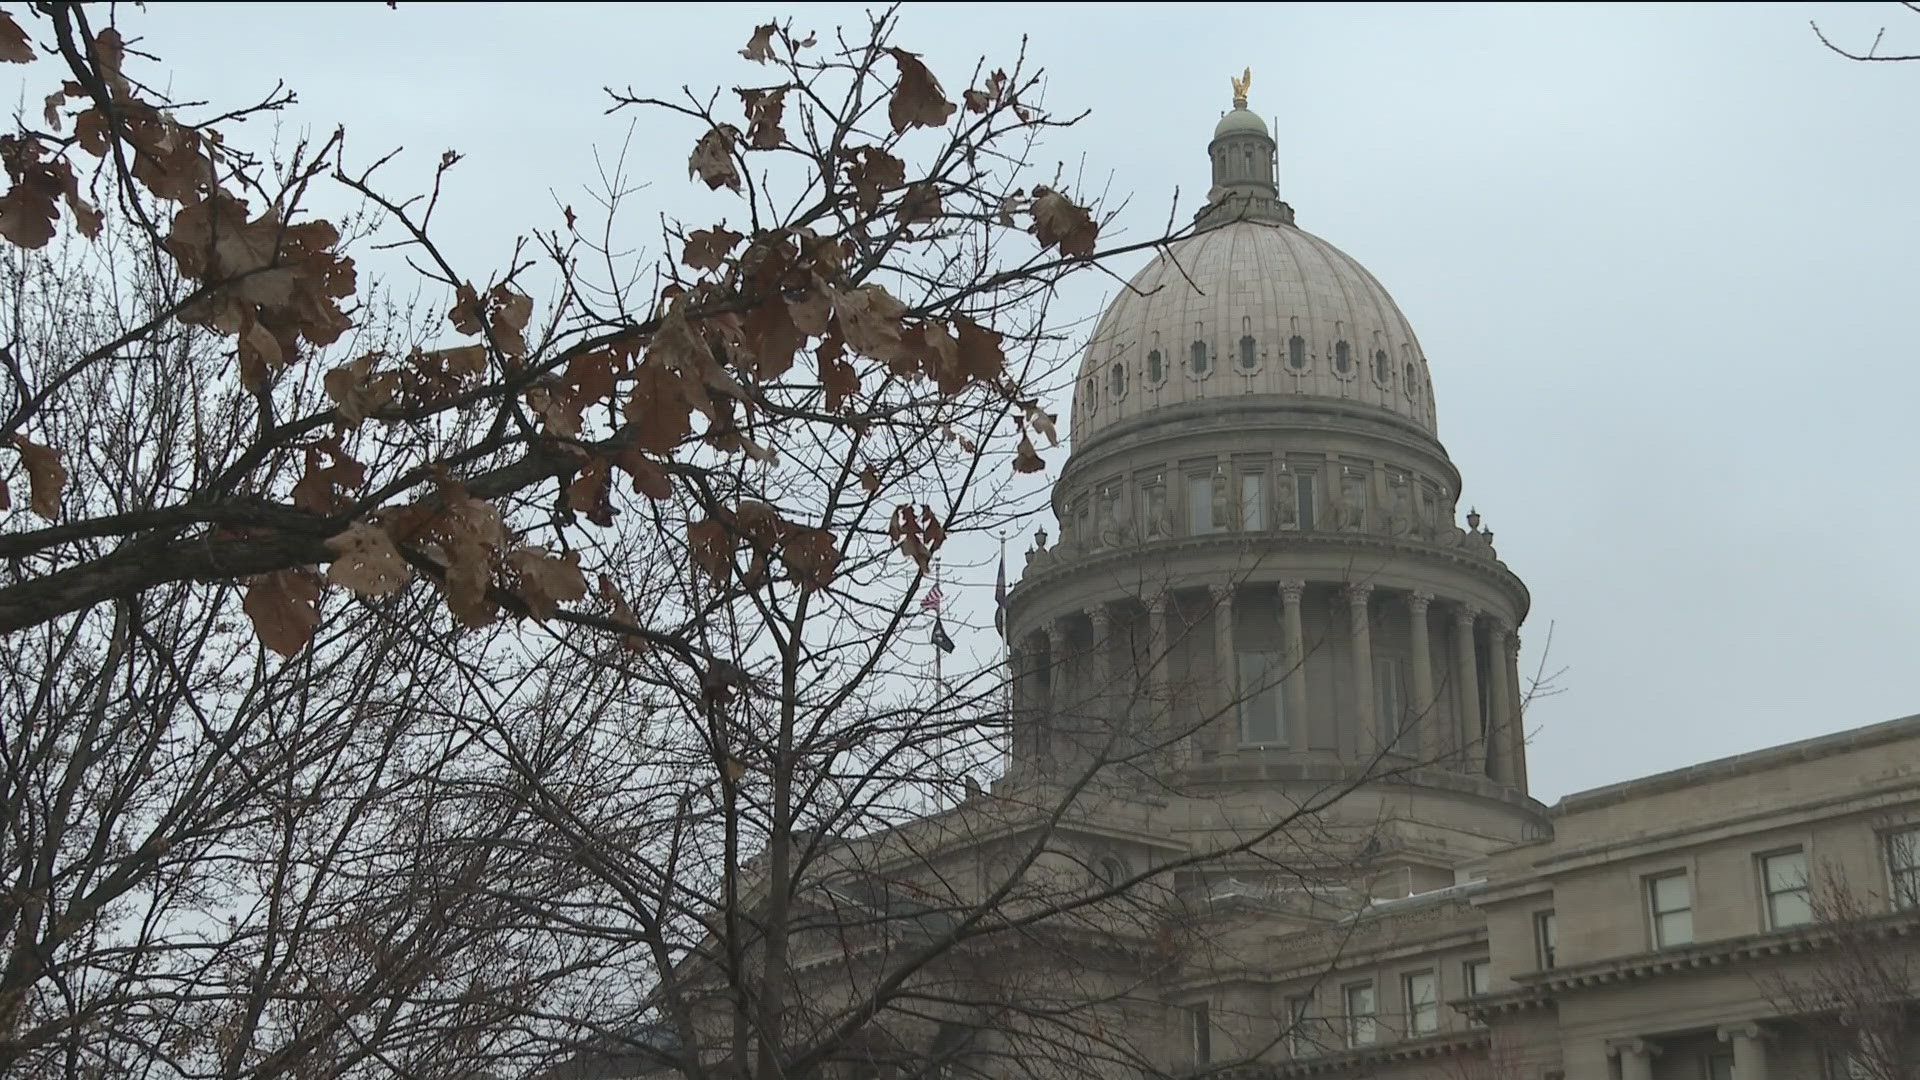 The bill’s sponsor, Rep. Ted Hill, R-Eagle, said the bill is intended to allow teachers and other staff to step in if there’s a school shooting and quickly respond.